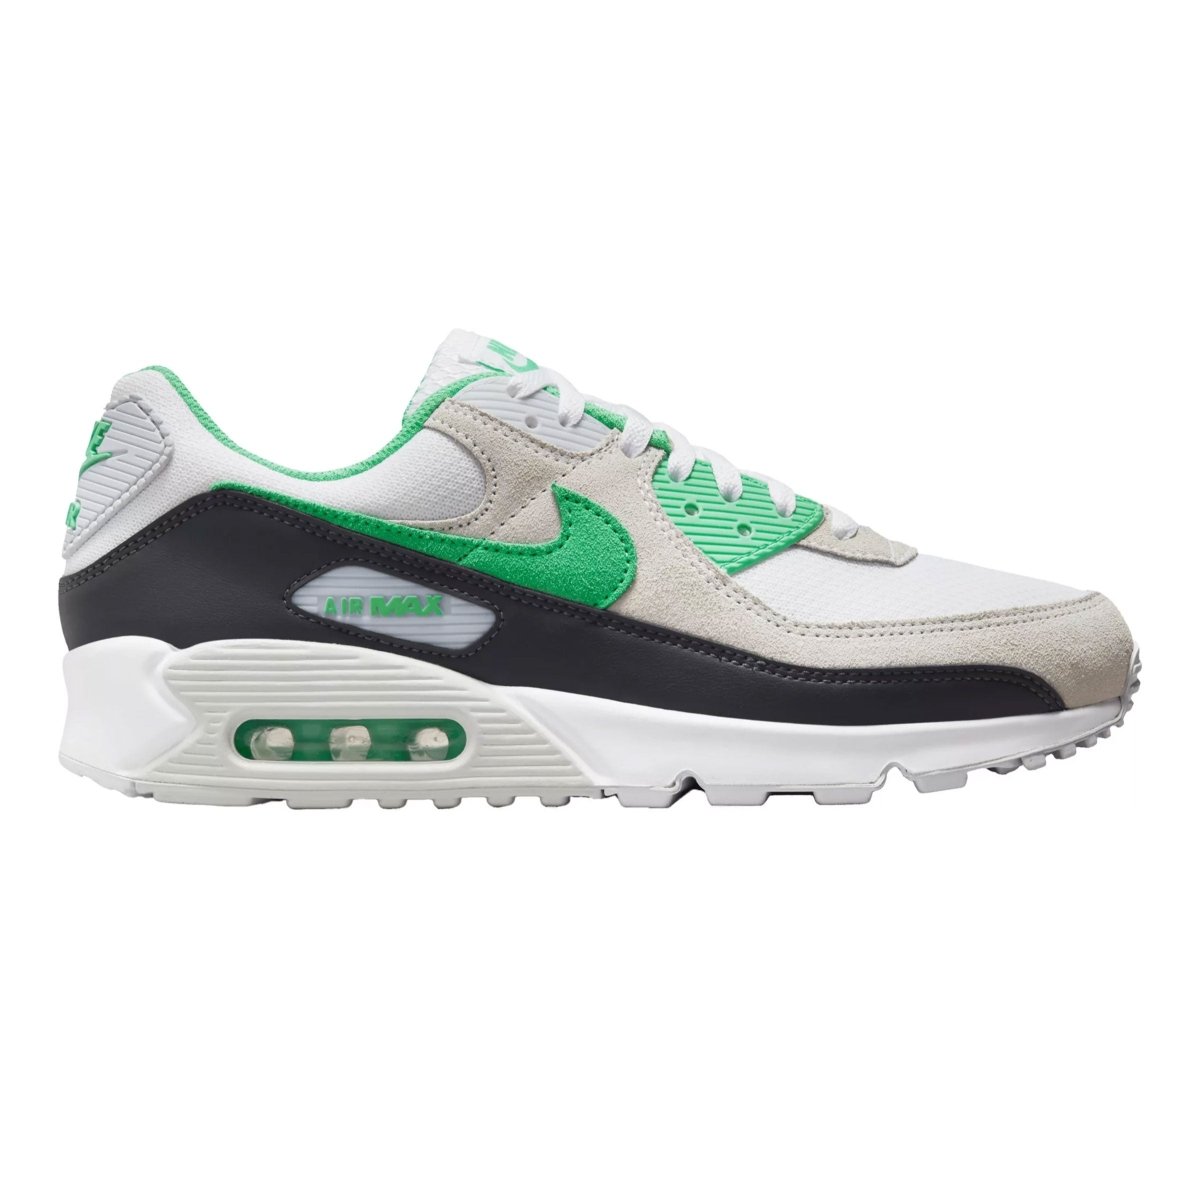 Nike Men's Air Max 90 White/Green/Grey - 10029600 - West NYC